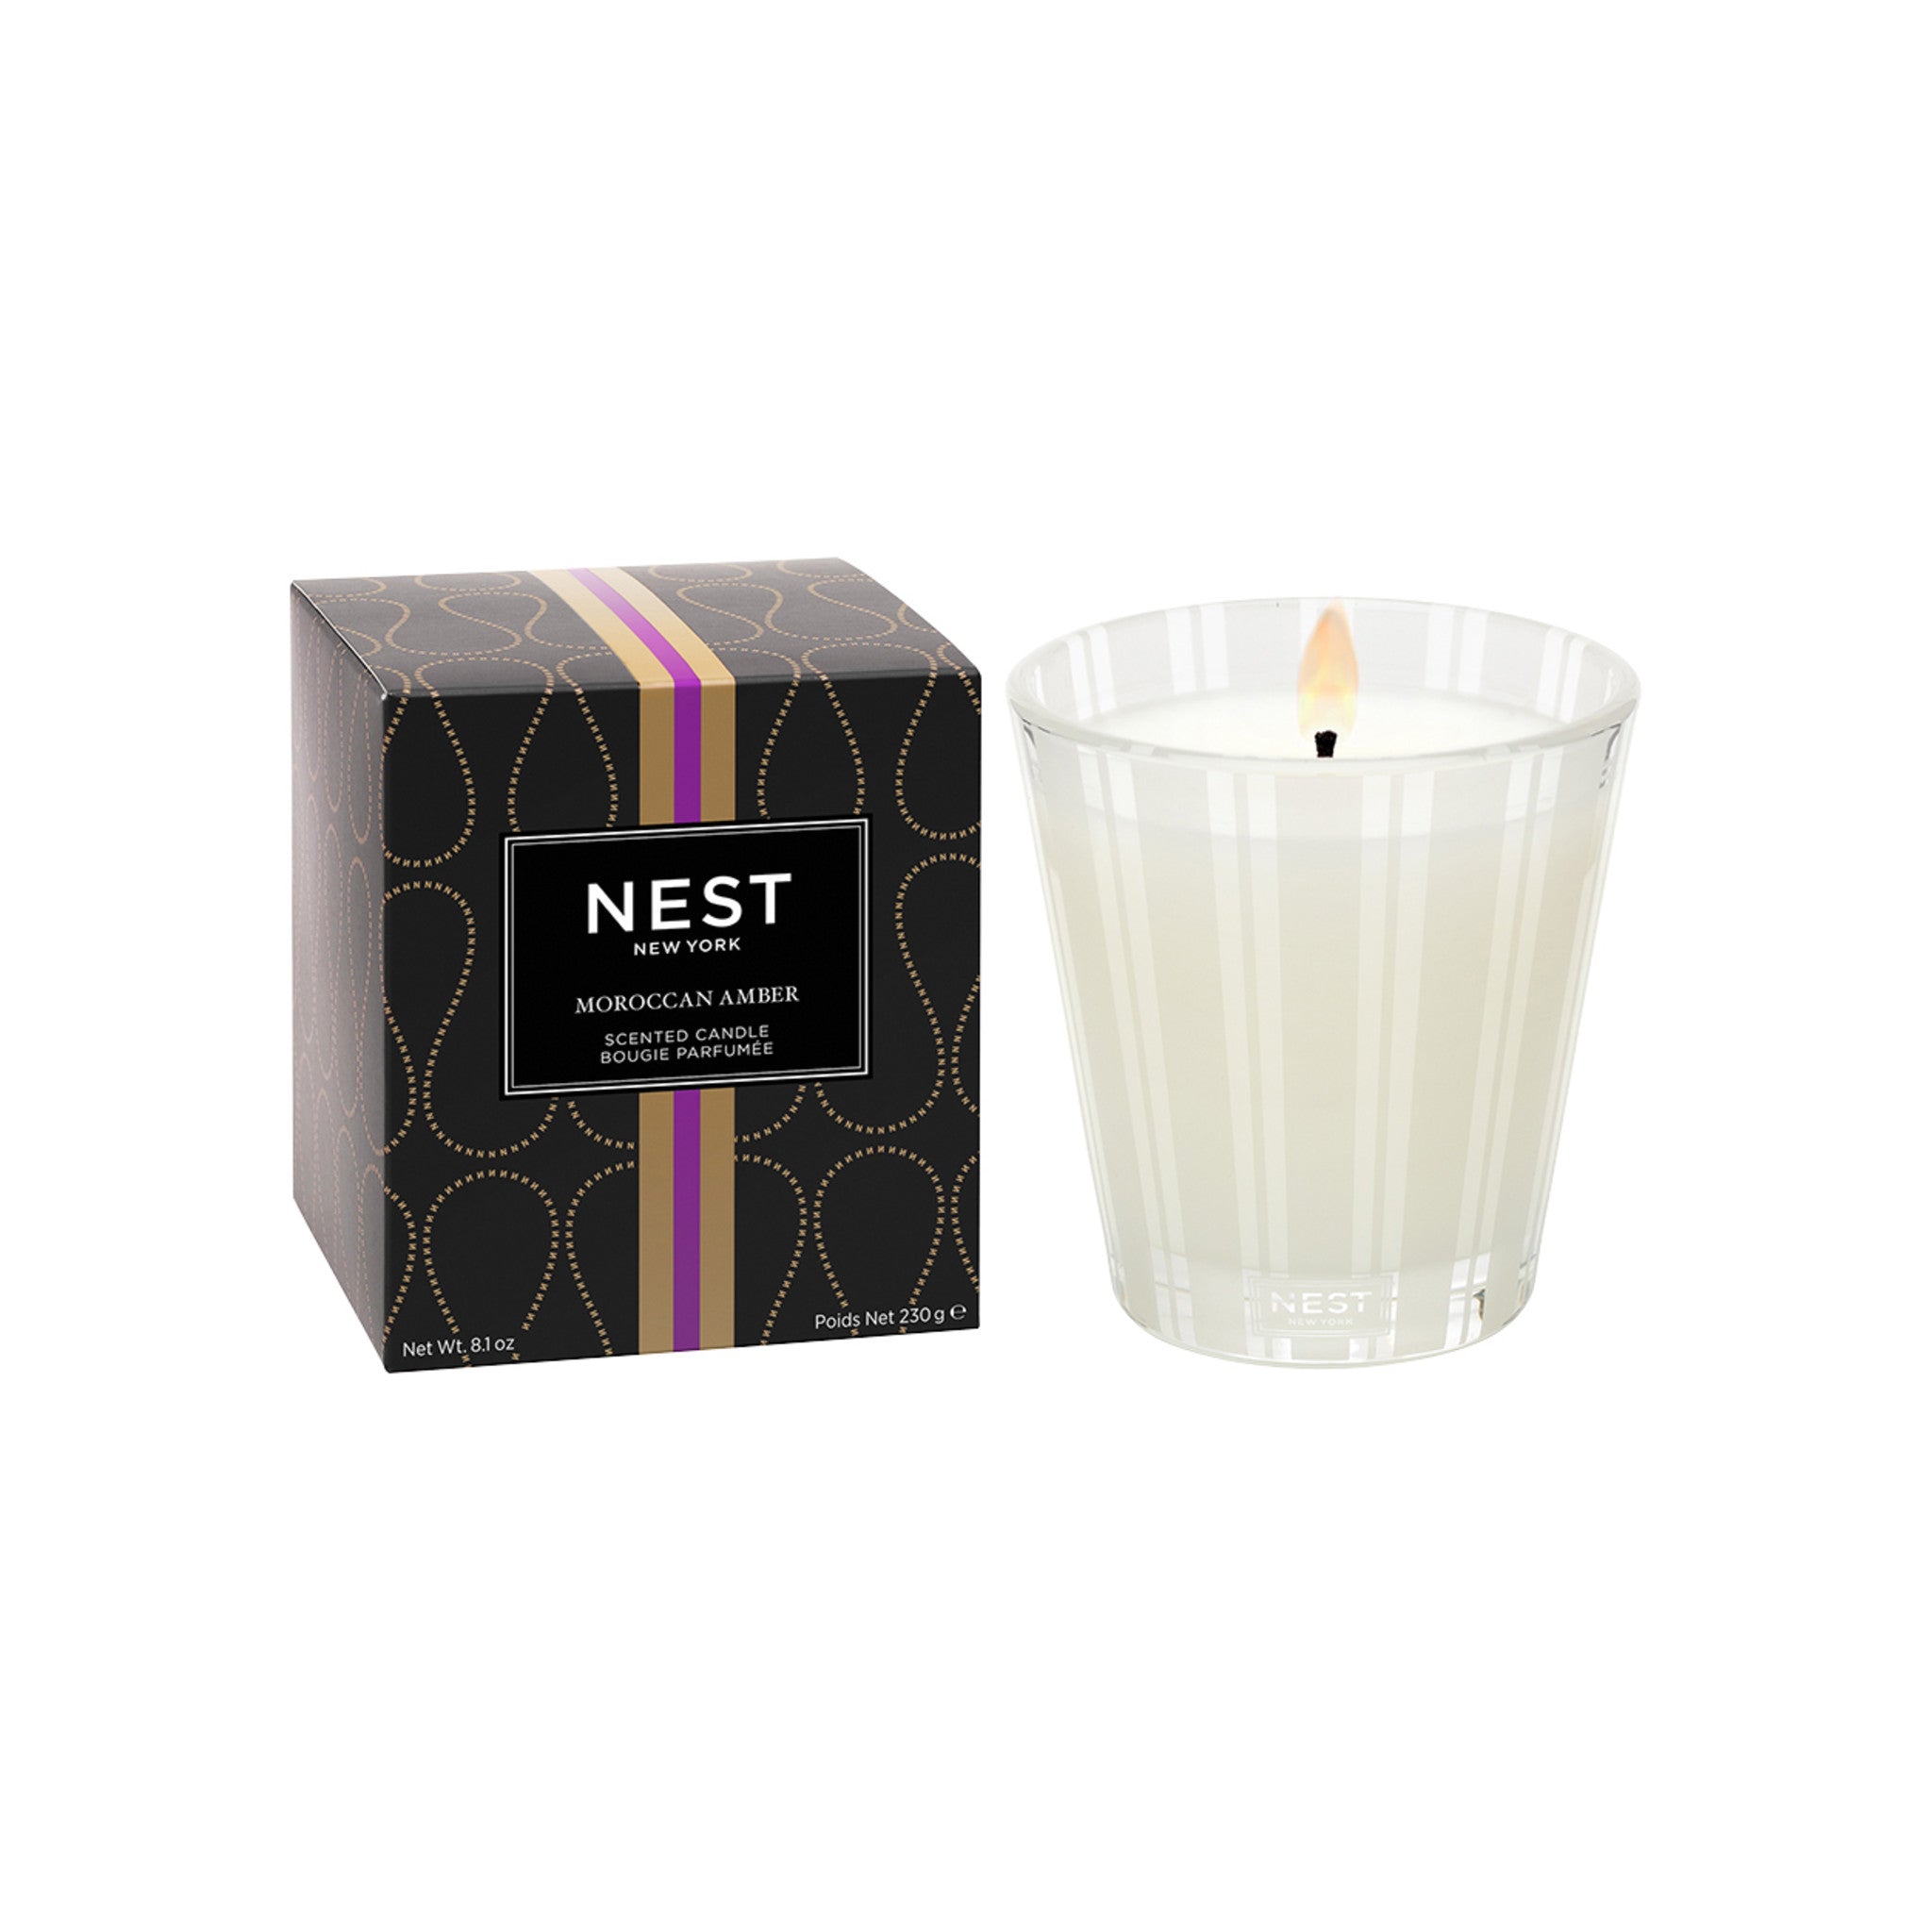 Nest Moroccan Amber Candle Size variant: 8.1 oz (Classic) main image.